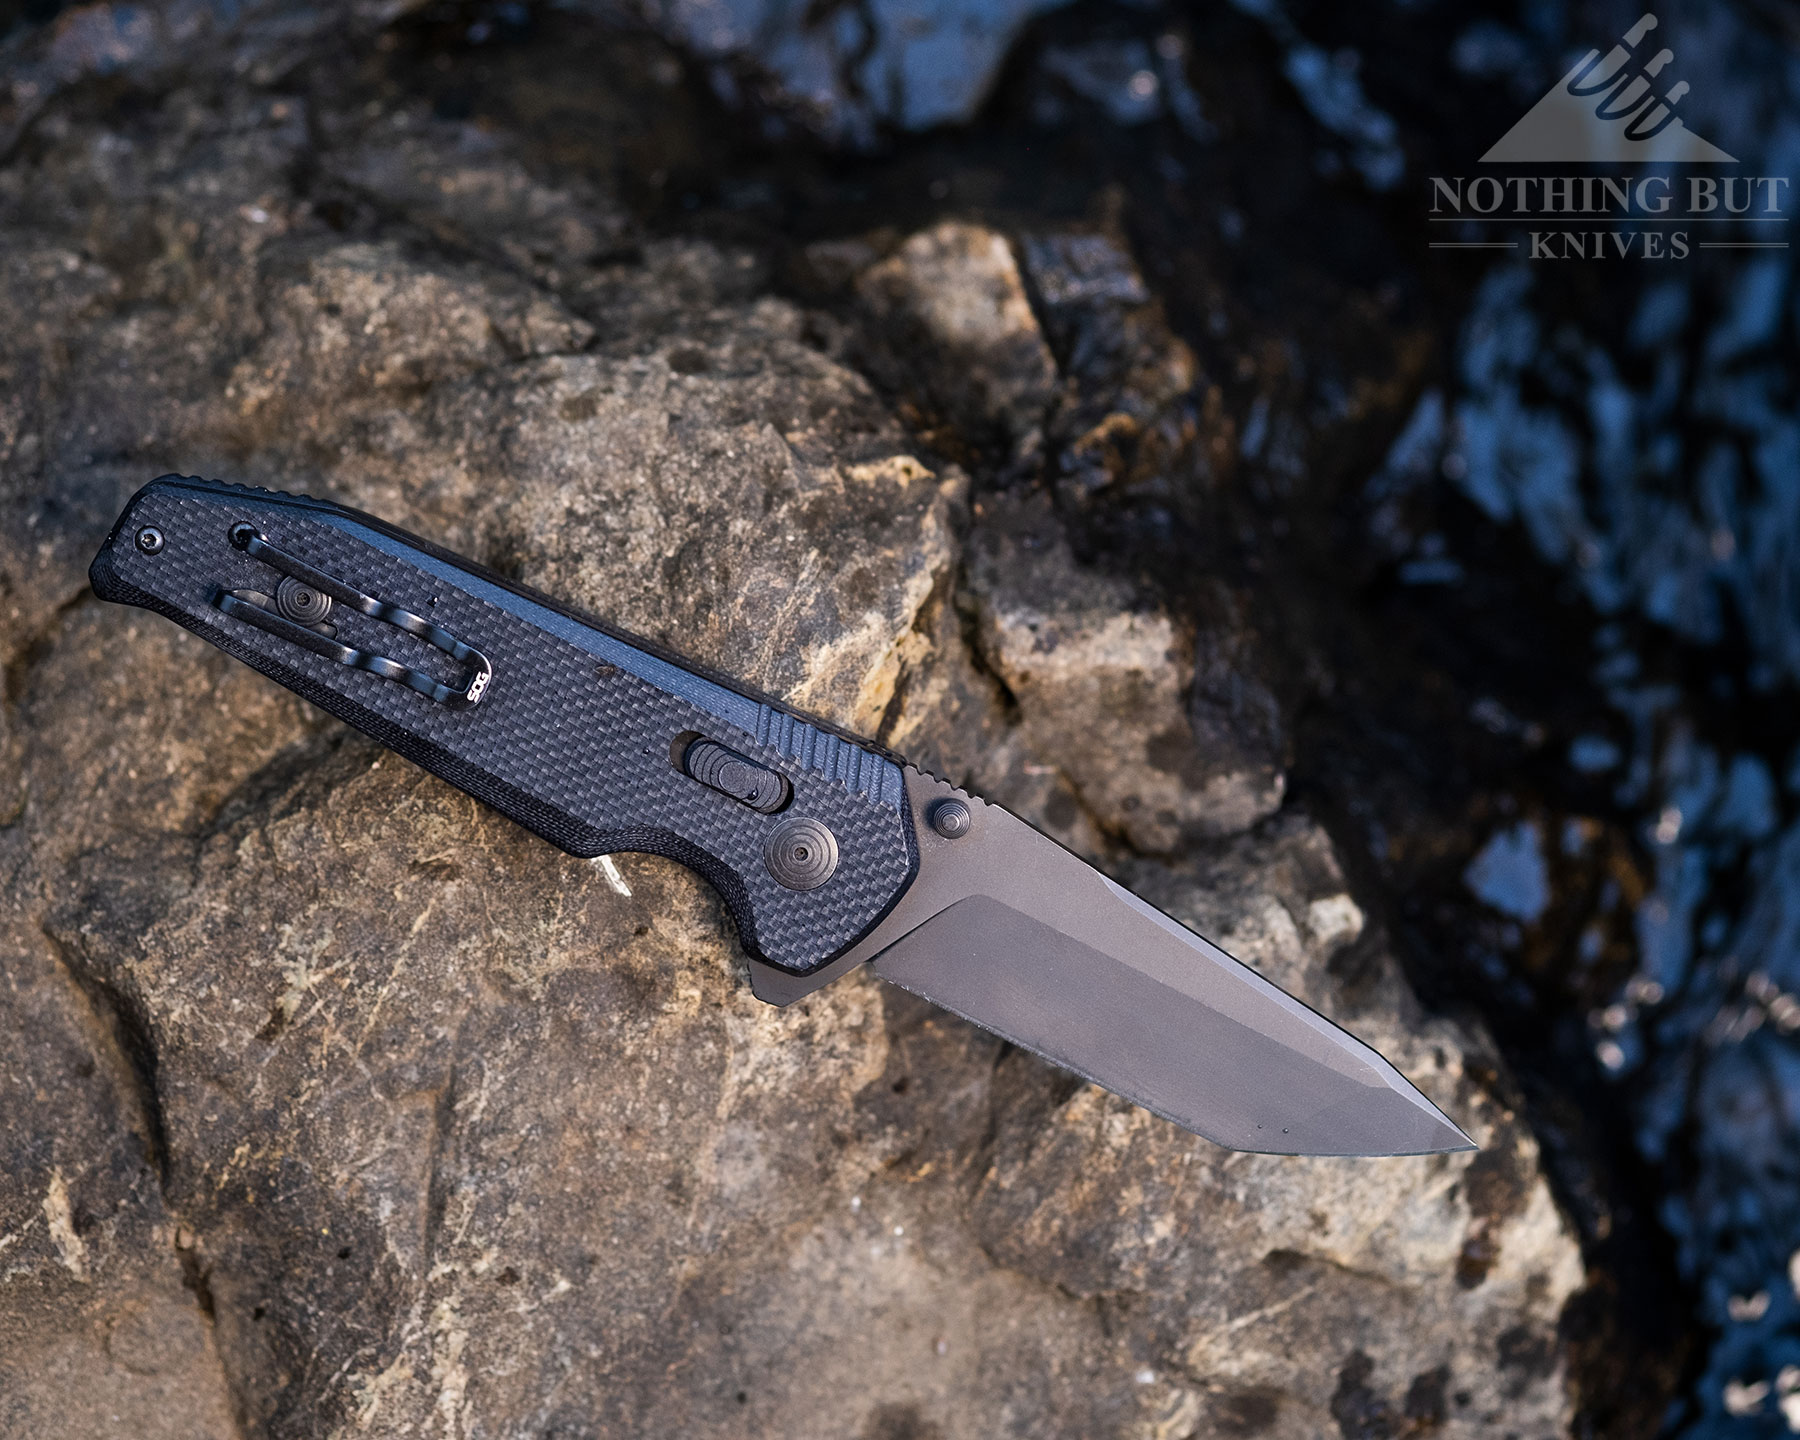 The SOG Vision XR, pictured here by a creek, has good fit and finish, but not great.